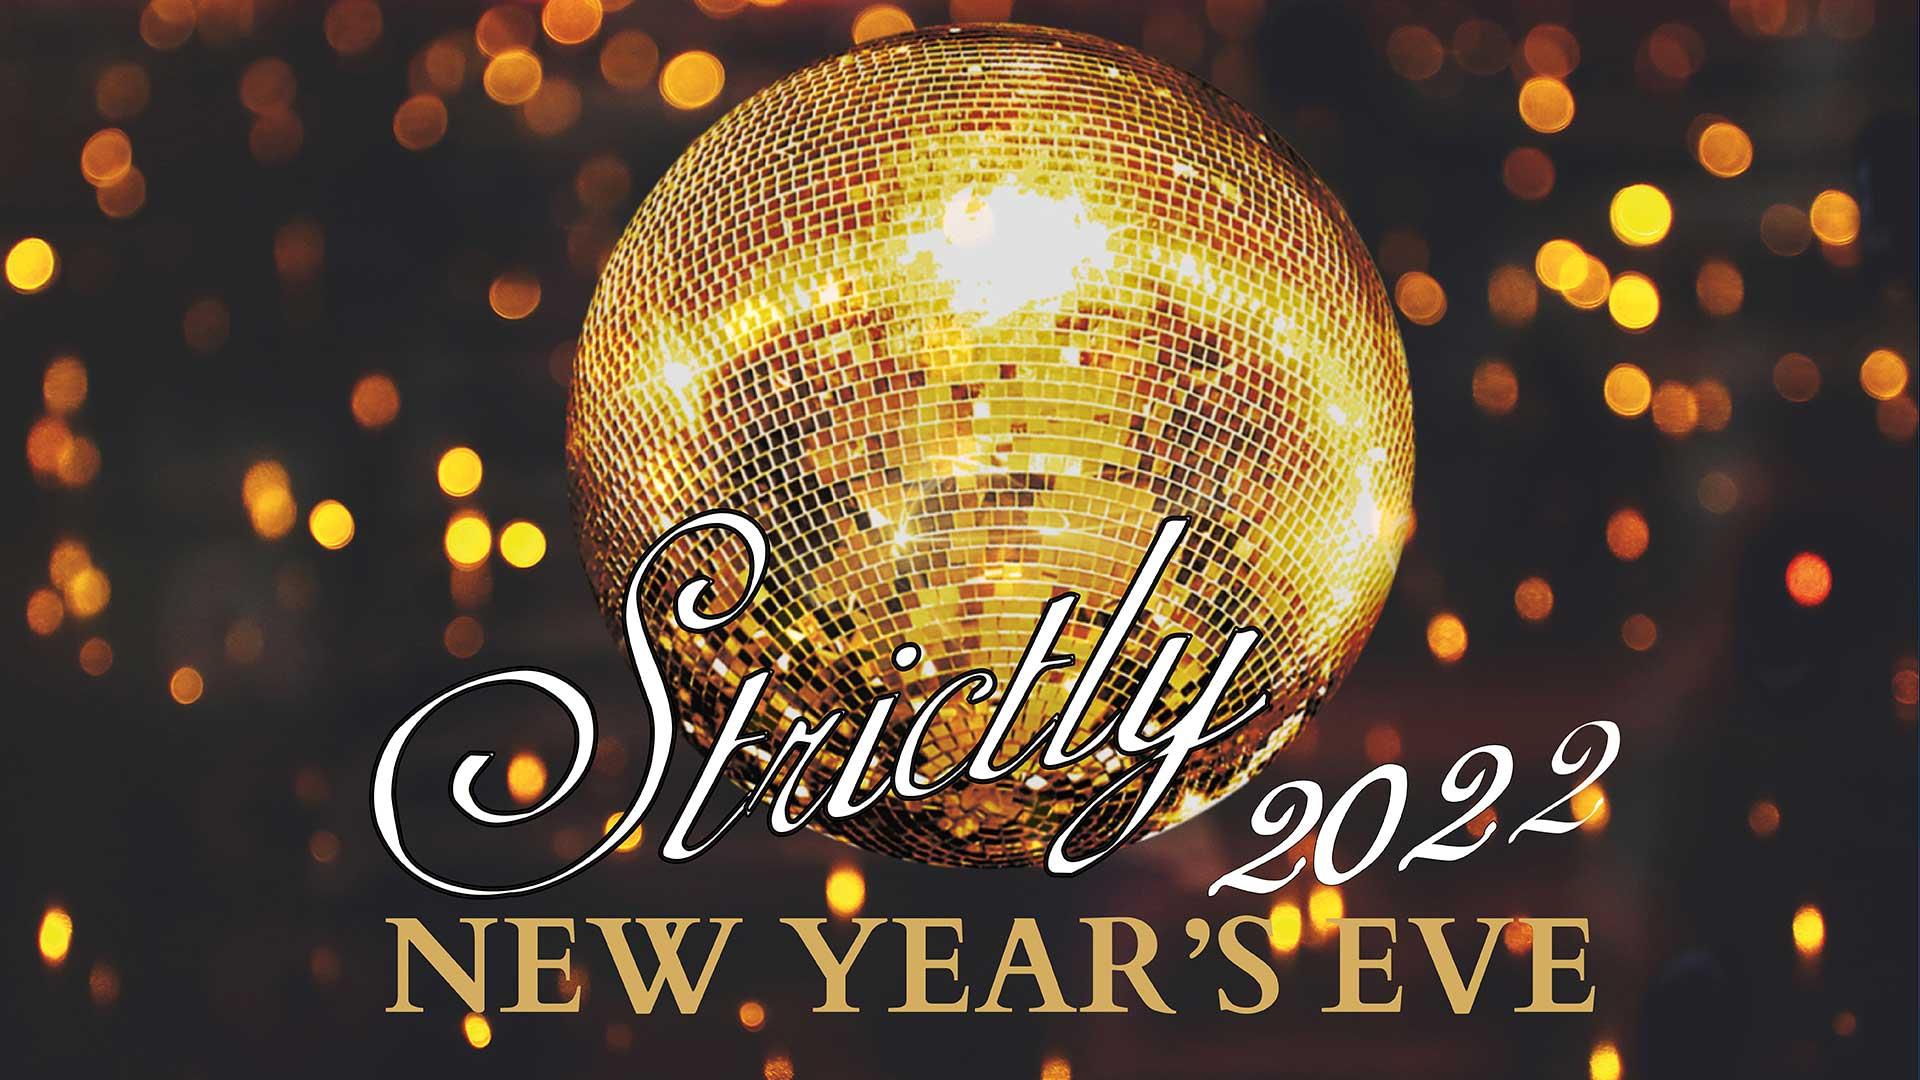 Strictly New Year’s Eve Ball 2022 - Lowther Pavilion